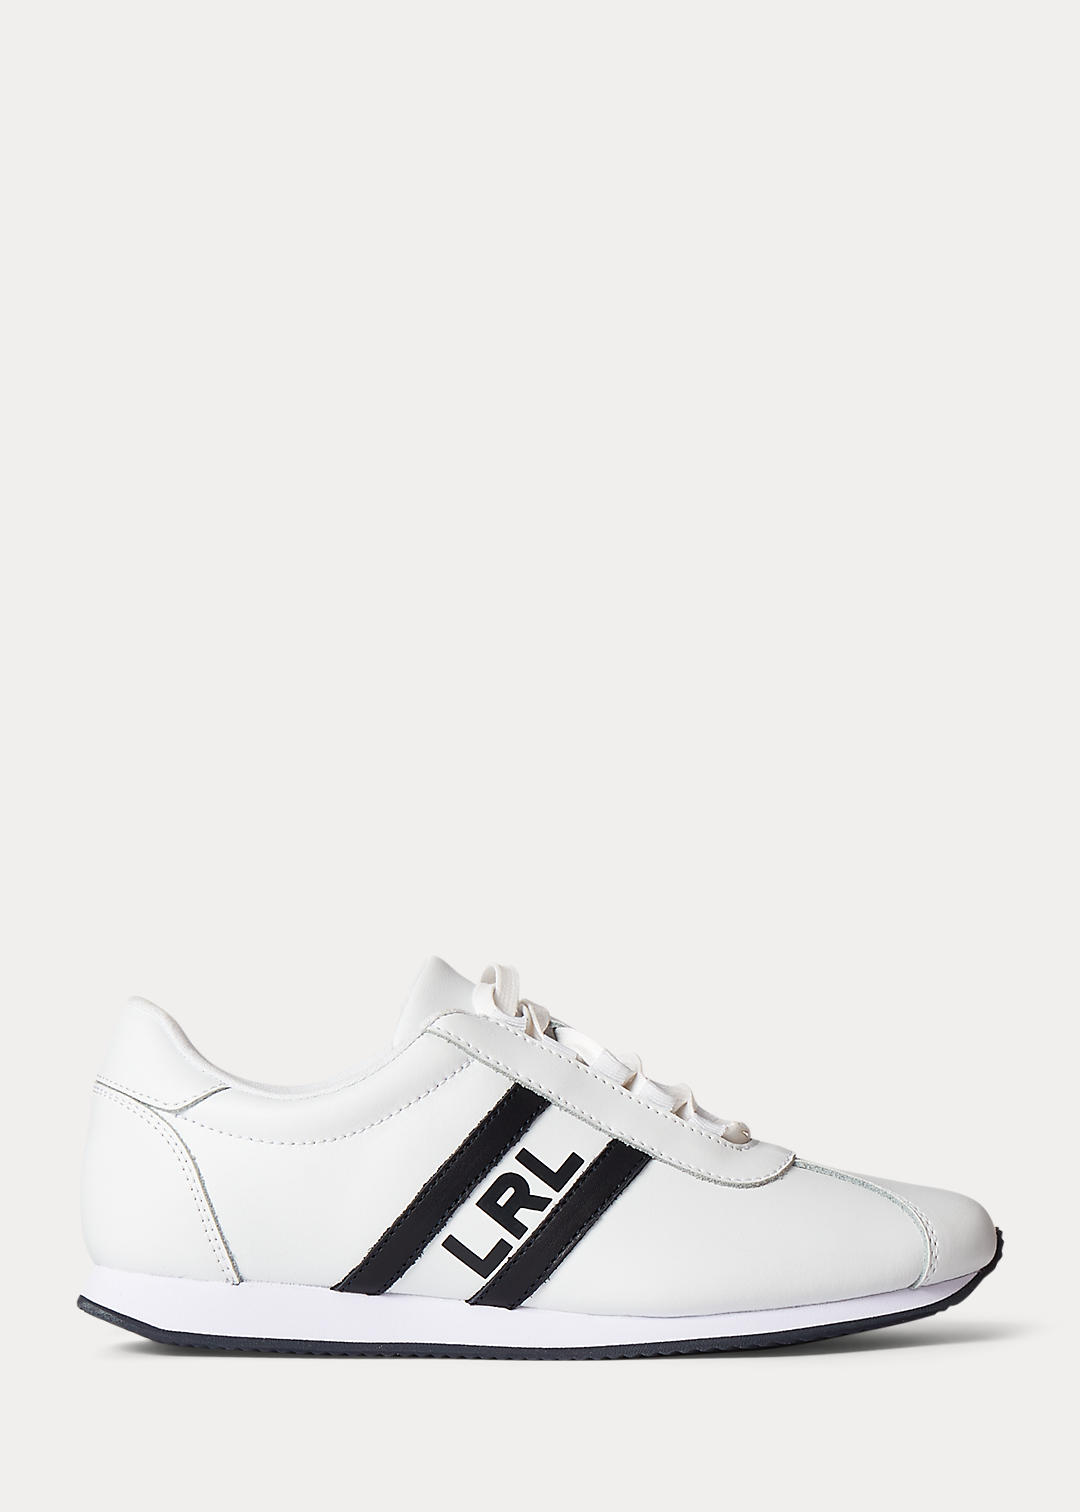 Obsession partition lose yourself Cayden Action Leather Sneaker